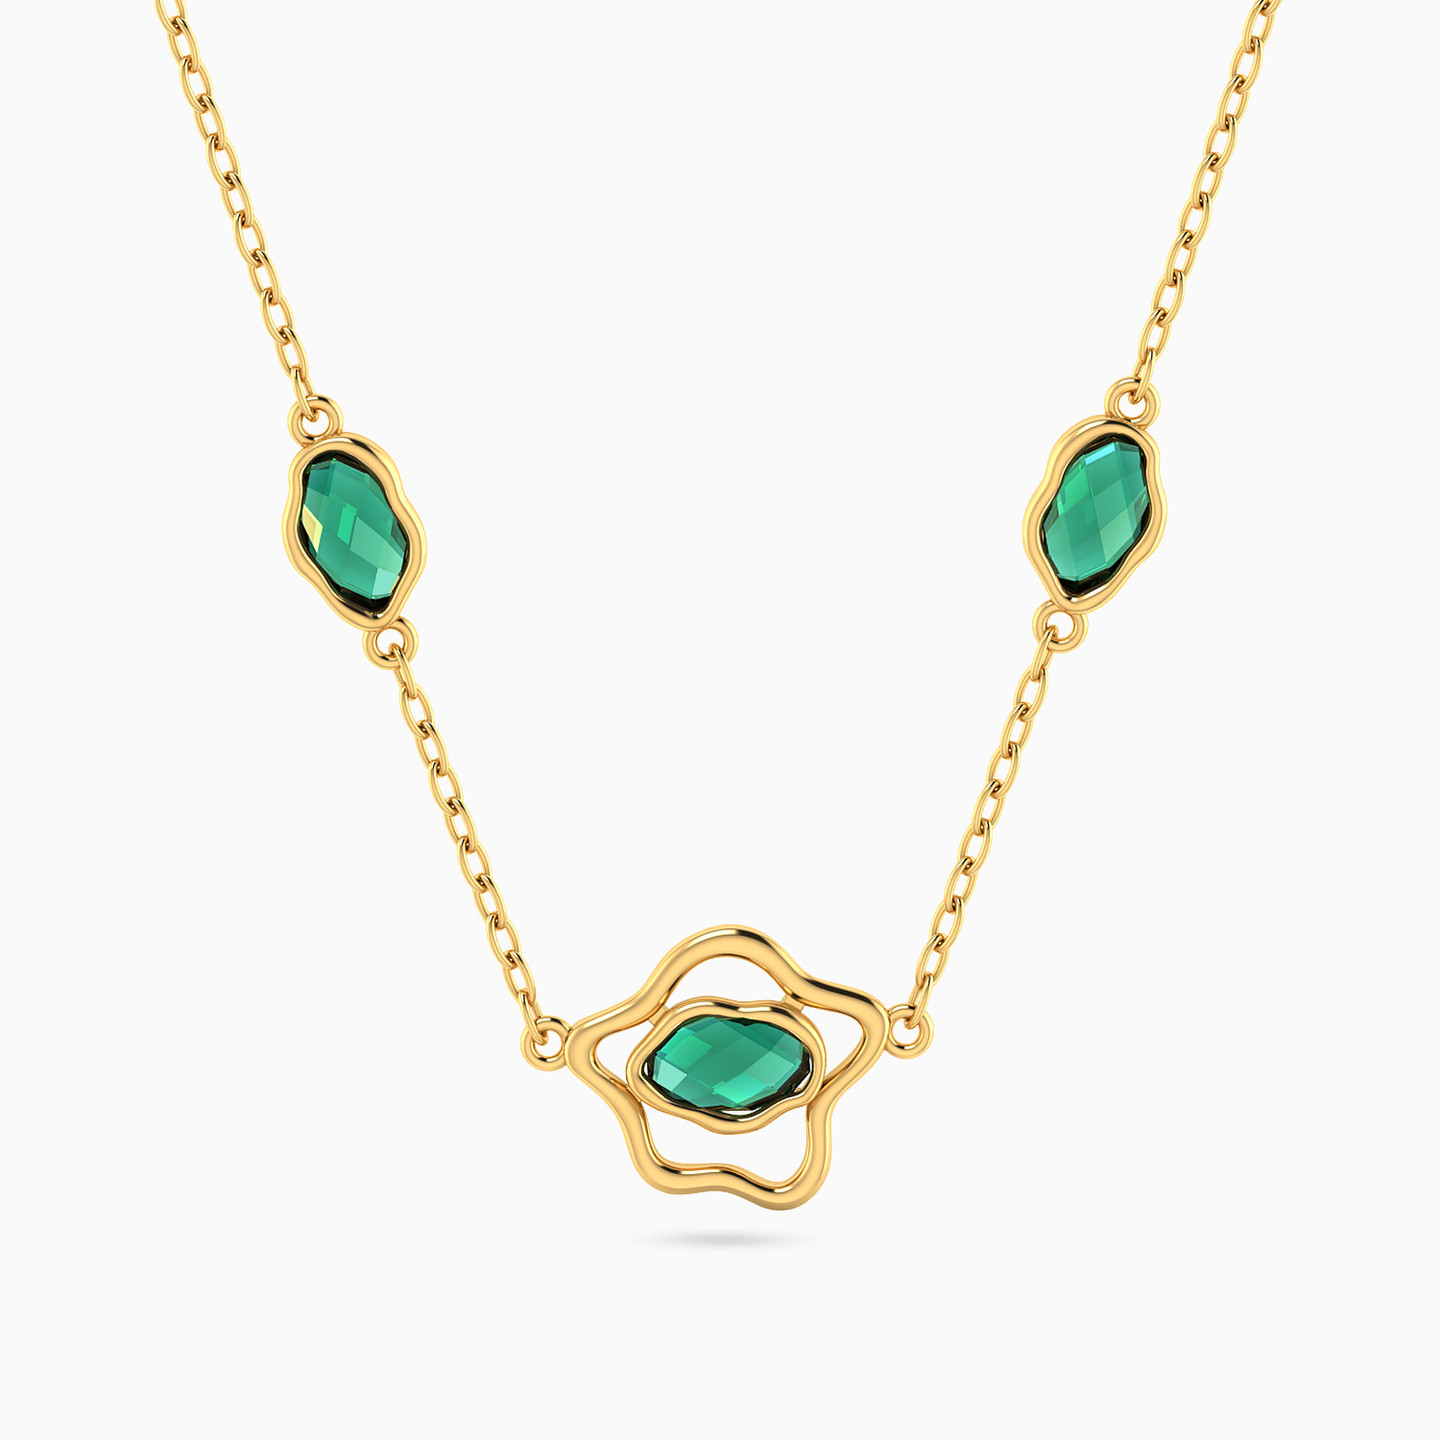 Swirl Colored Stones Necklace In 14K Gold - 4